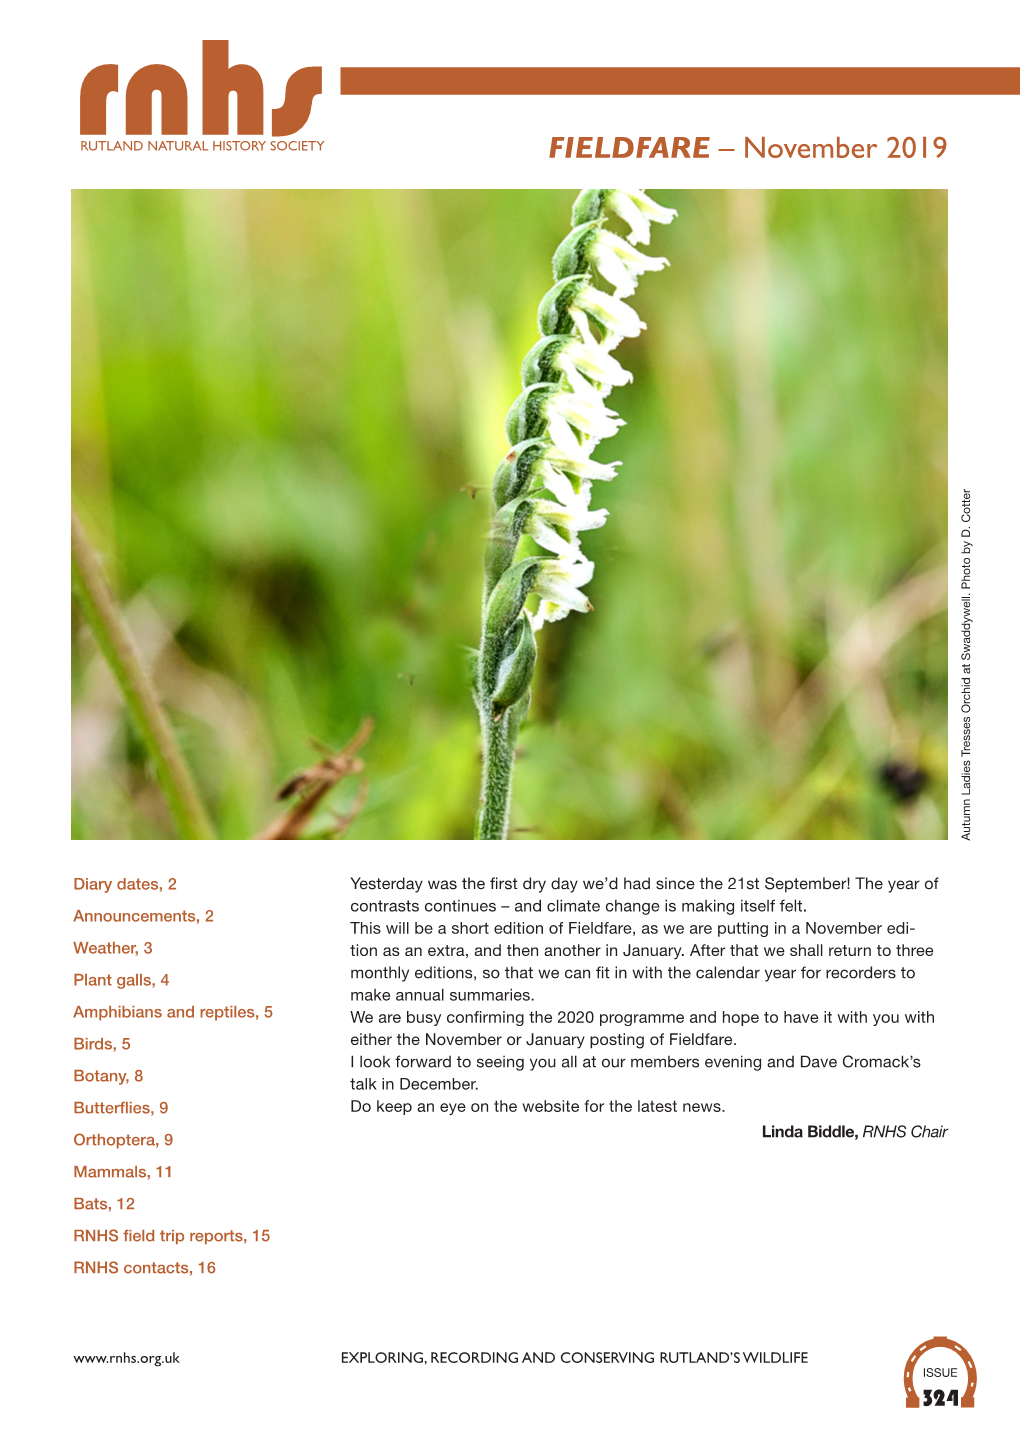 FIELDFARE – November 2019 Autumn Ladies Tresses Orchid at Swaddywell